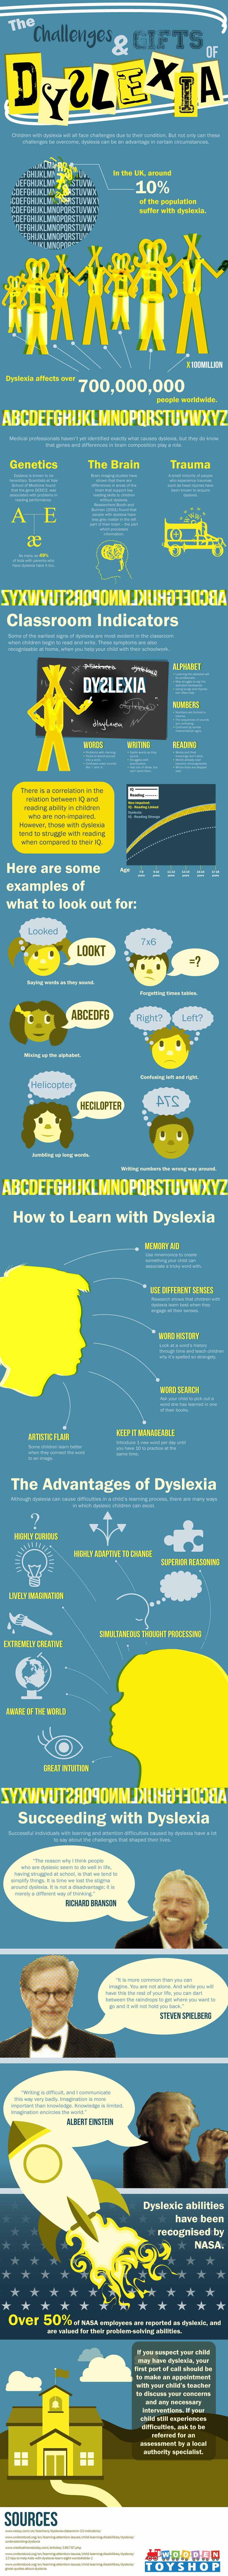 The Challenges and Gifts of Dyslexia